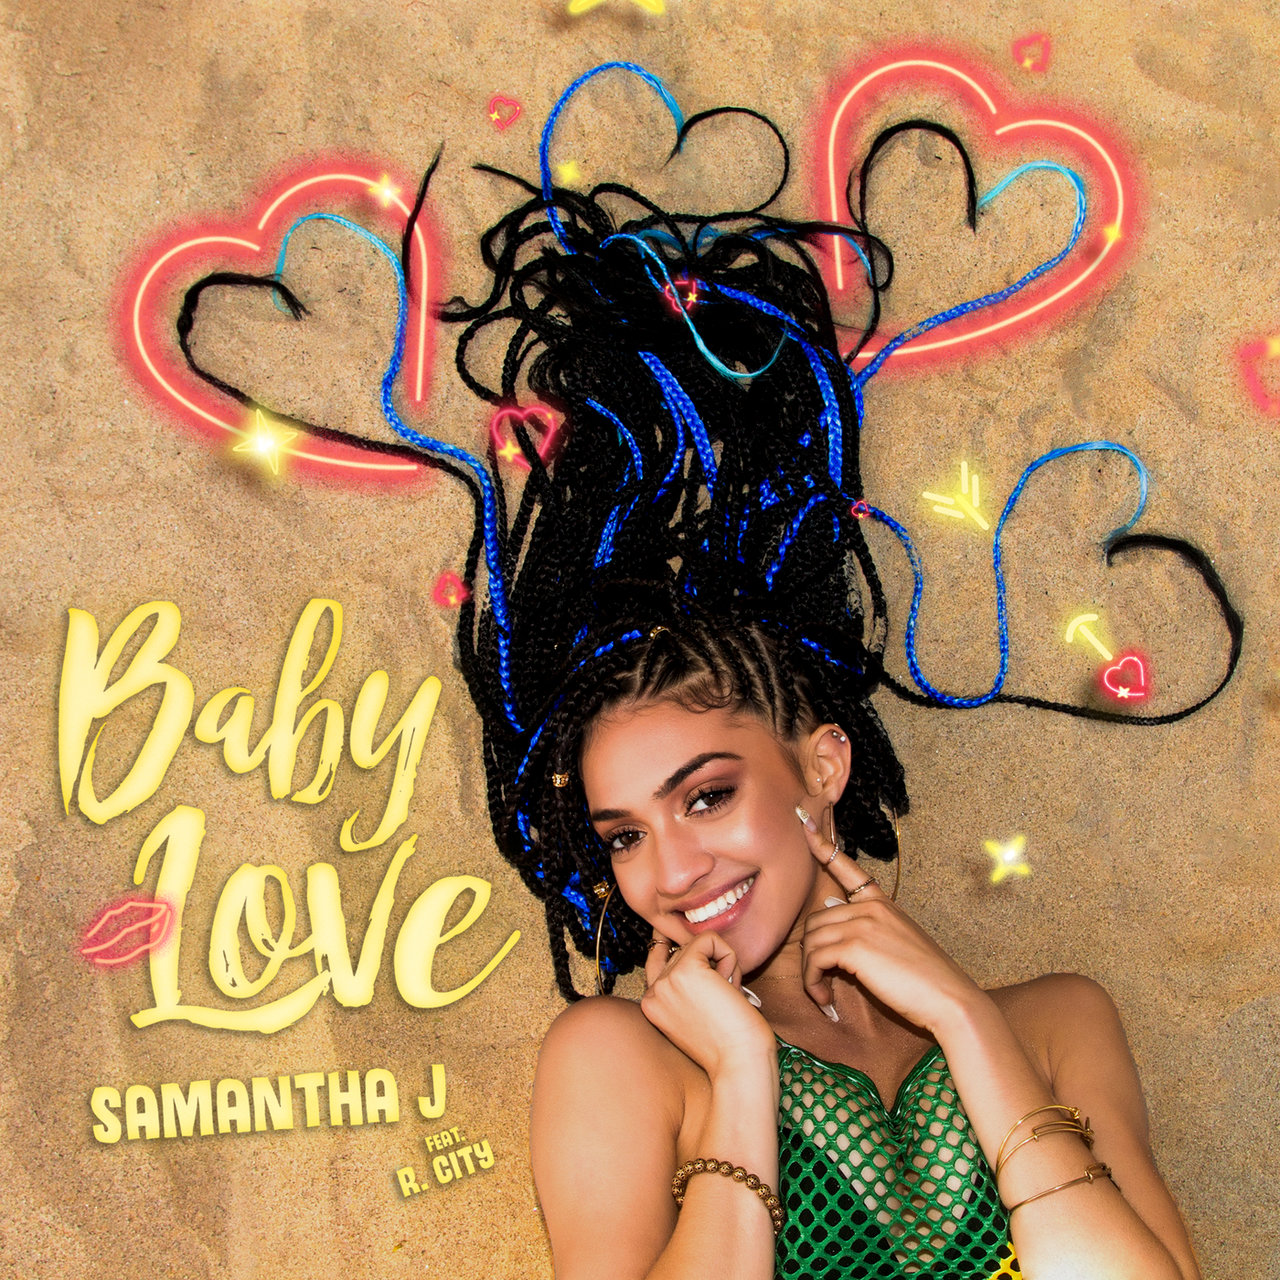 Samantha J ft. featuring R. City Baby Love cover artwork